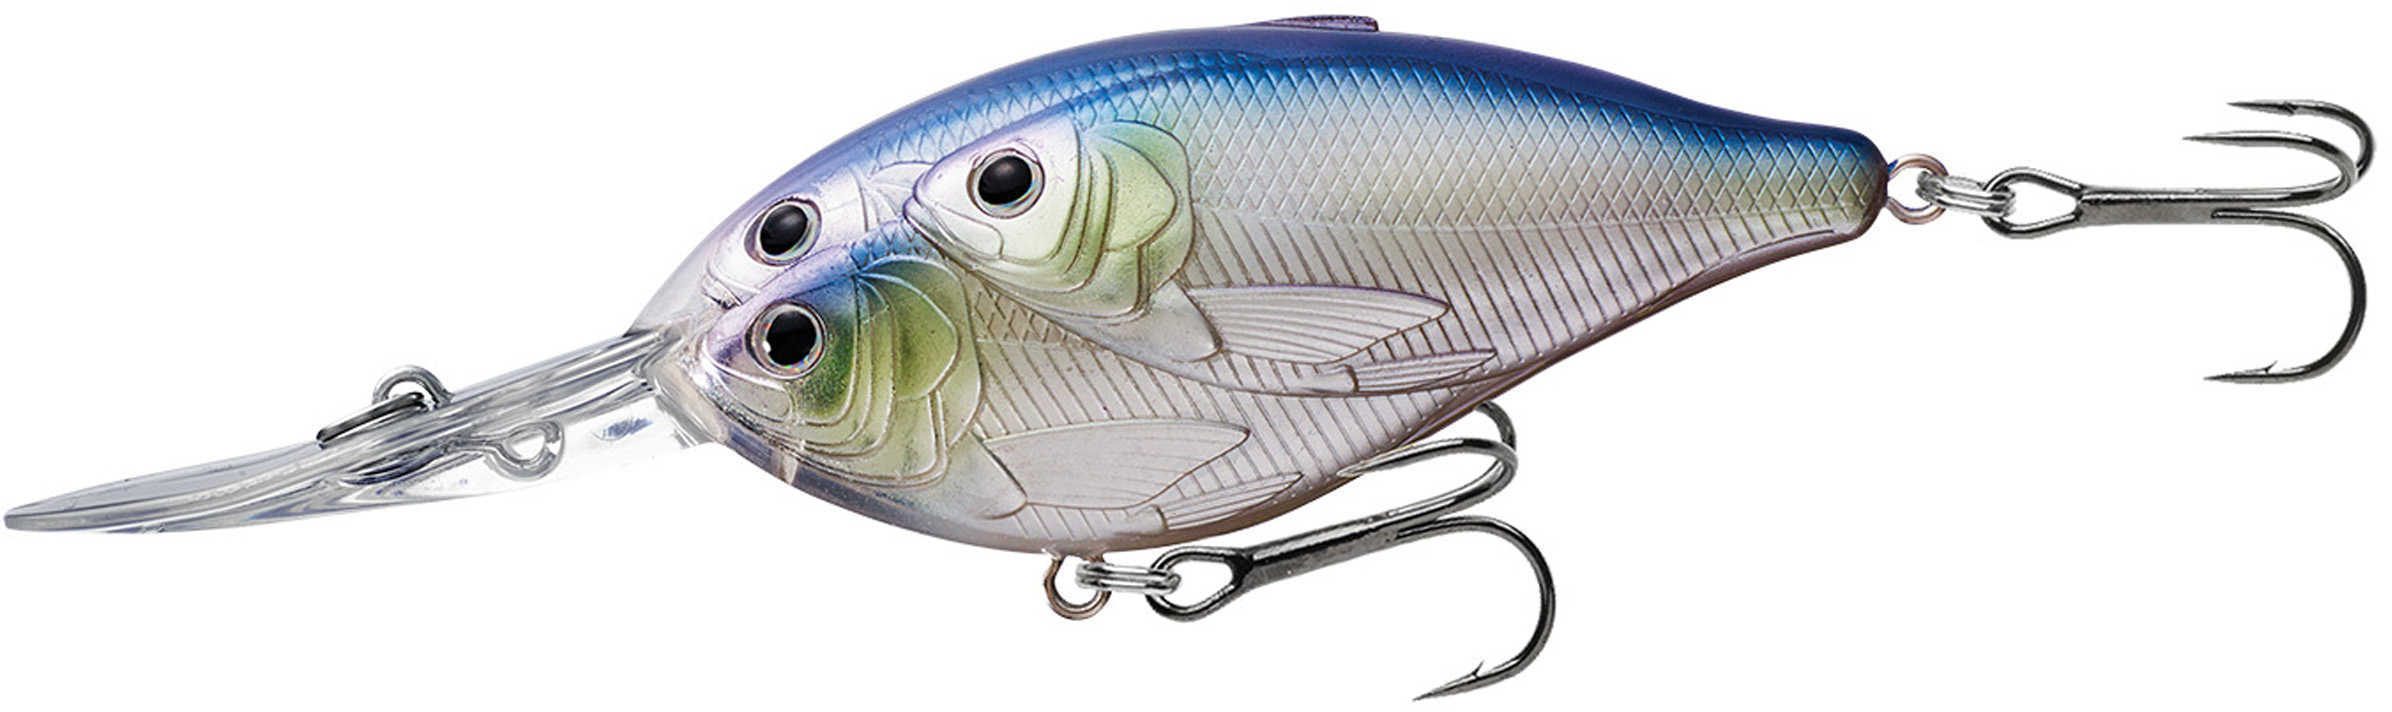 LIVETARGET Lures / Koppers Fishing and Tackle Corp Threadfin Shad Crankbait 3 1/2" Number Hook Size 20 Depth Metallic Pearl/Lavender